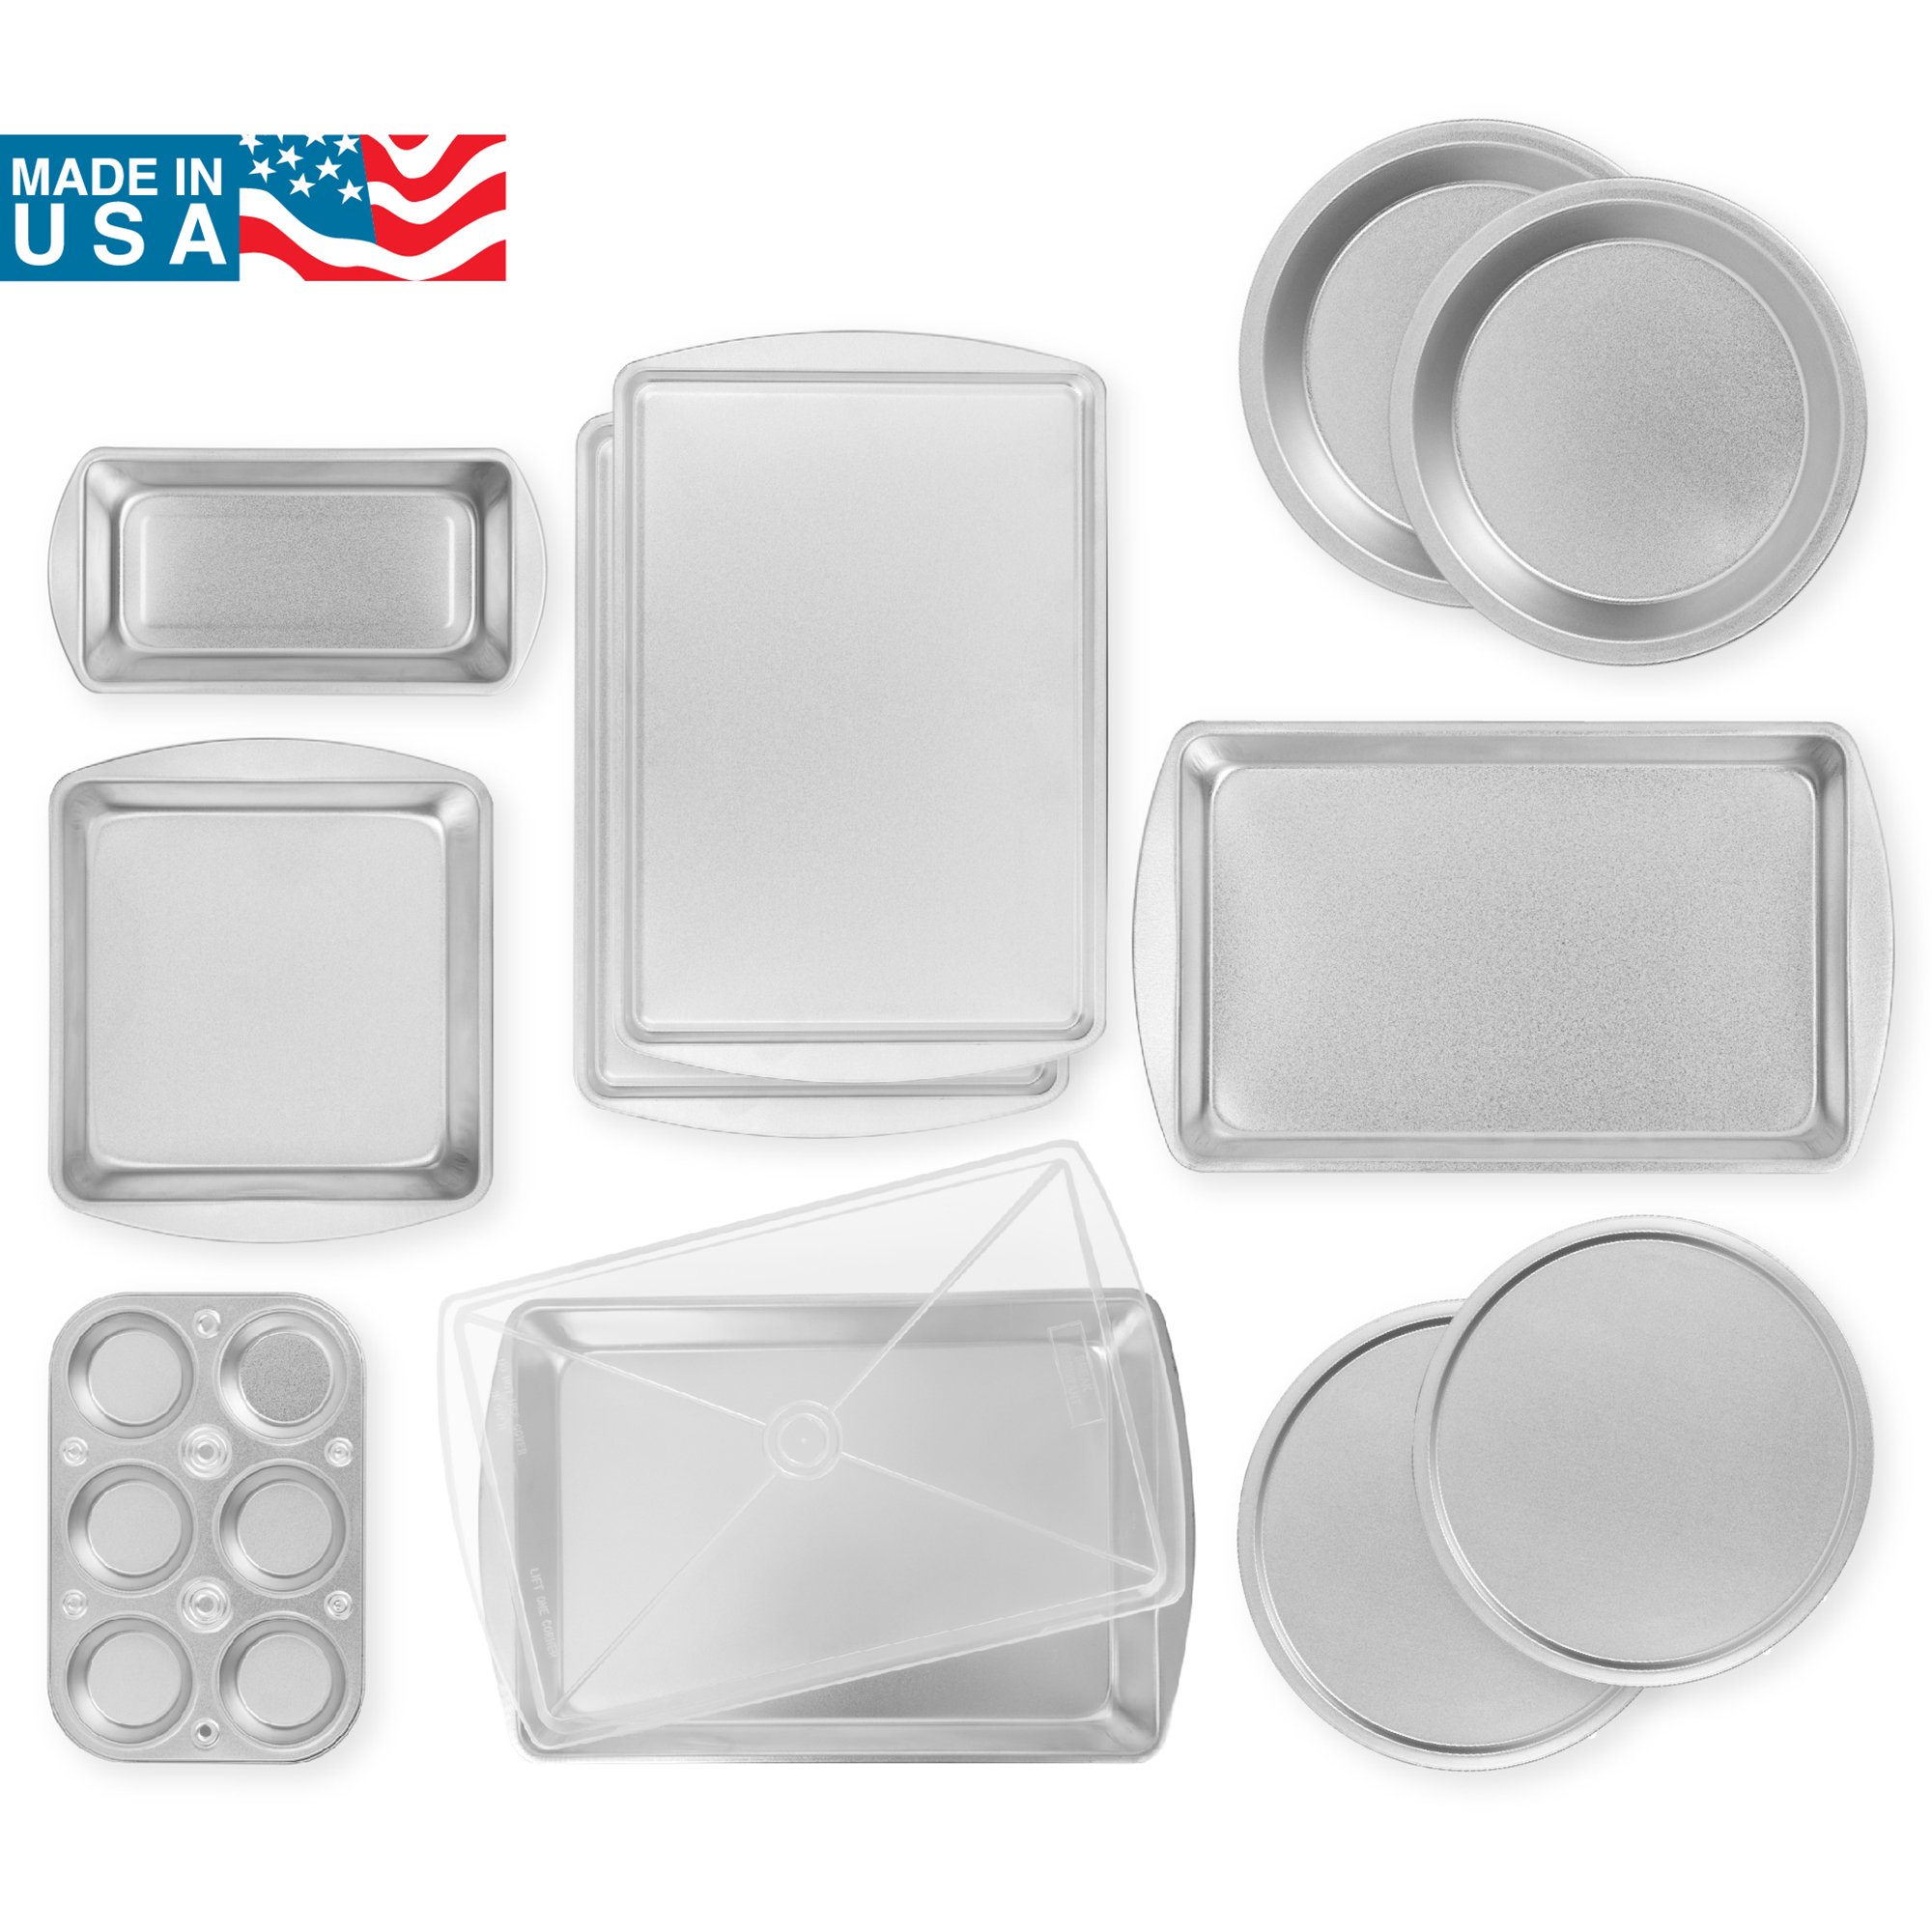 G & S Metal Products Company EZ Baker Uncoated, Steel 12Piece Bakeware Set